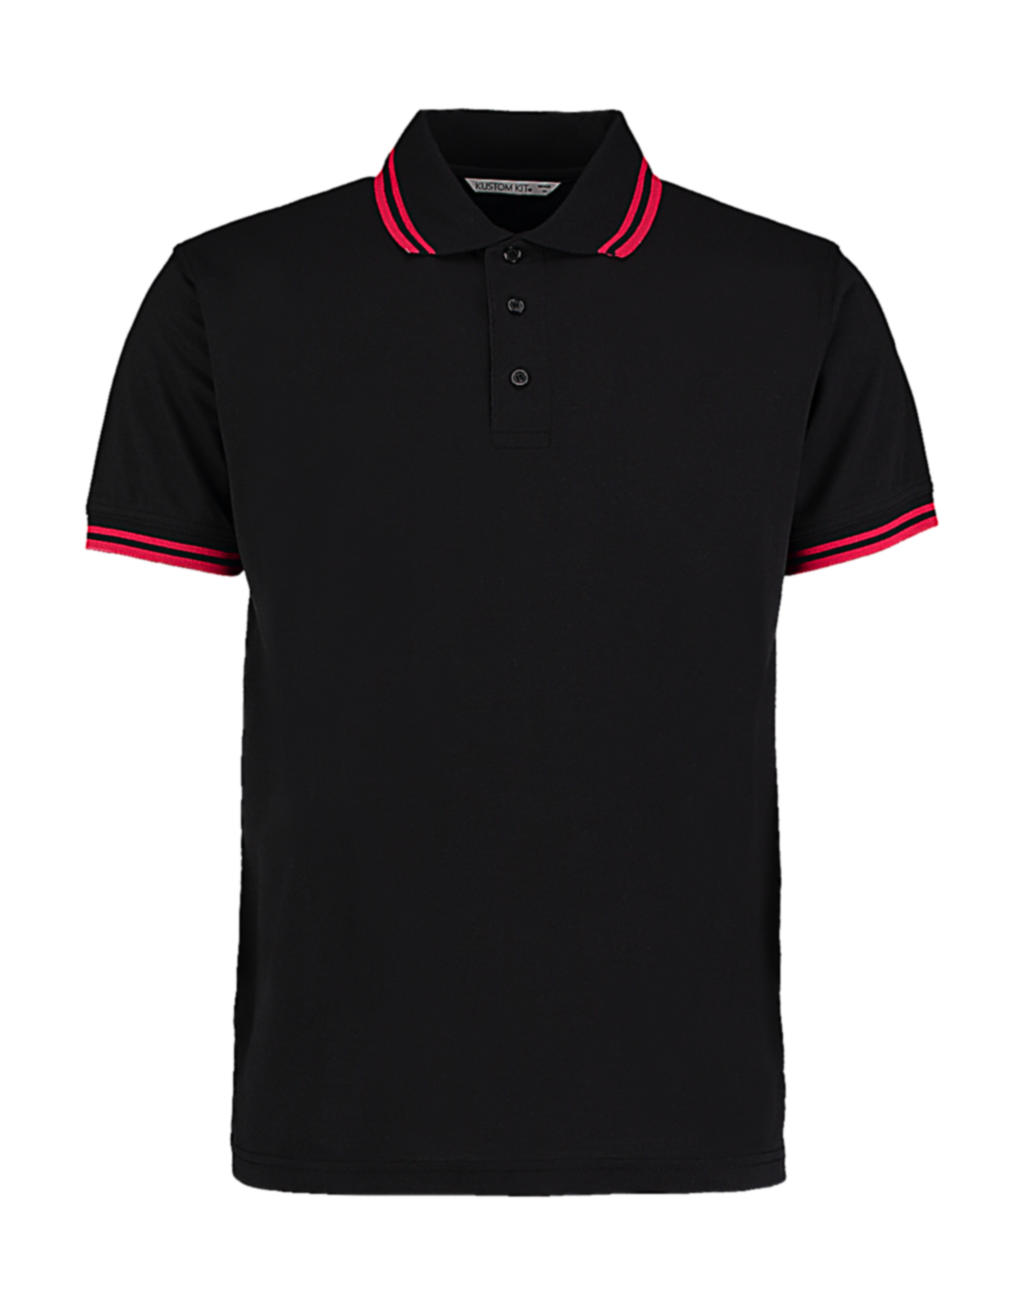  Classic Fit Tipped Collar Polo in Farbe Black/Red